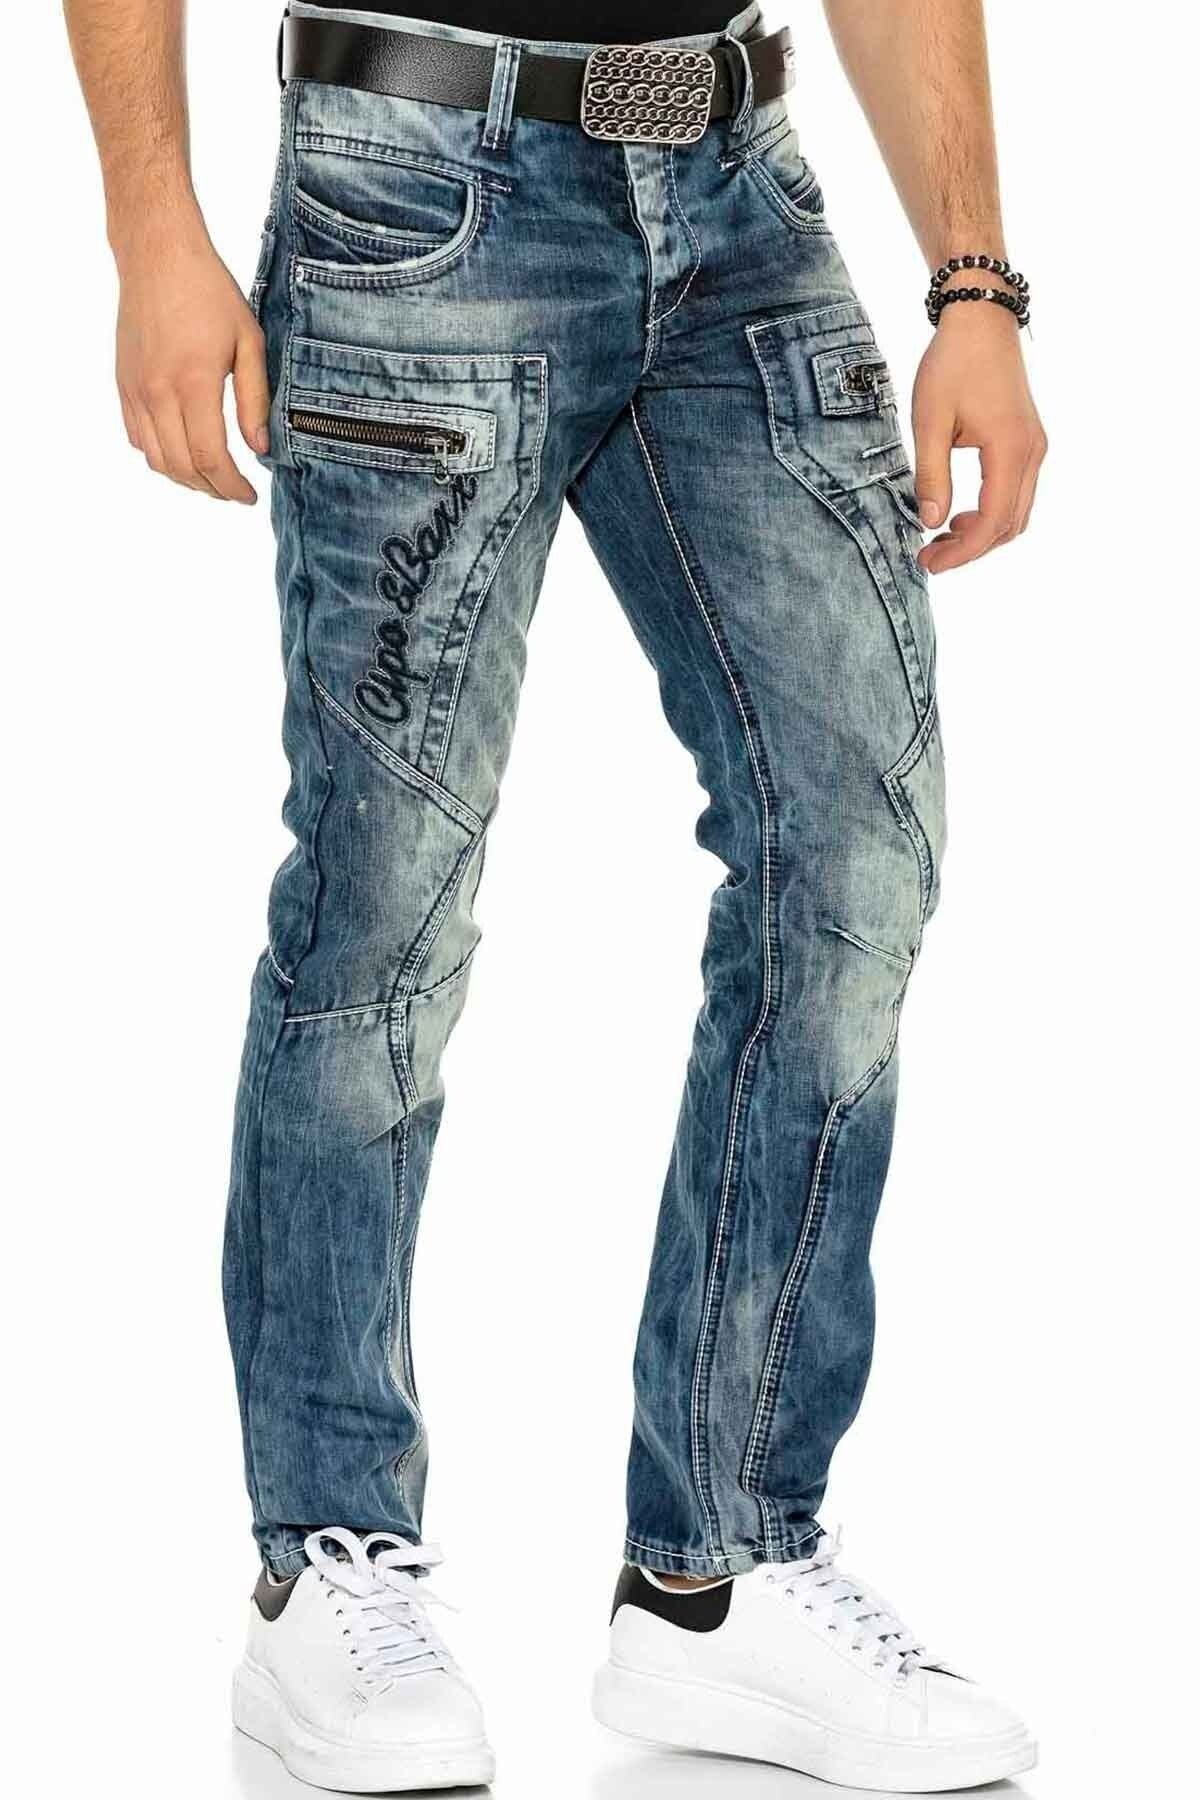 C-1178 Comfortable jeans in casual biker style